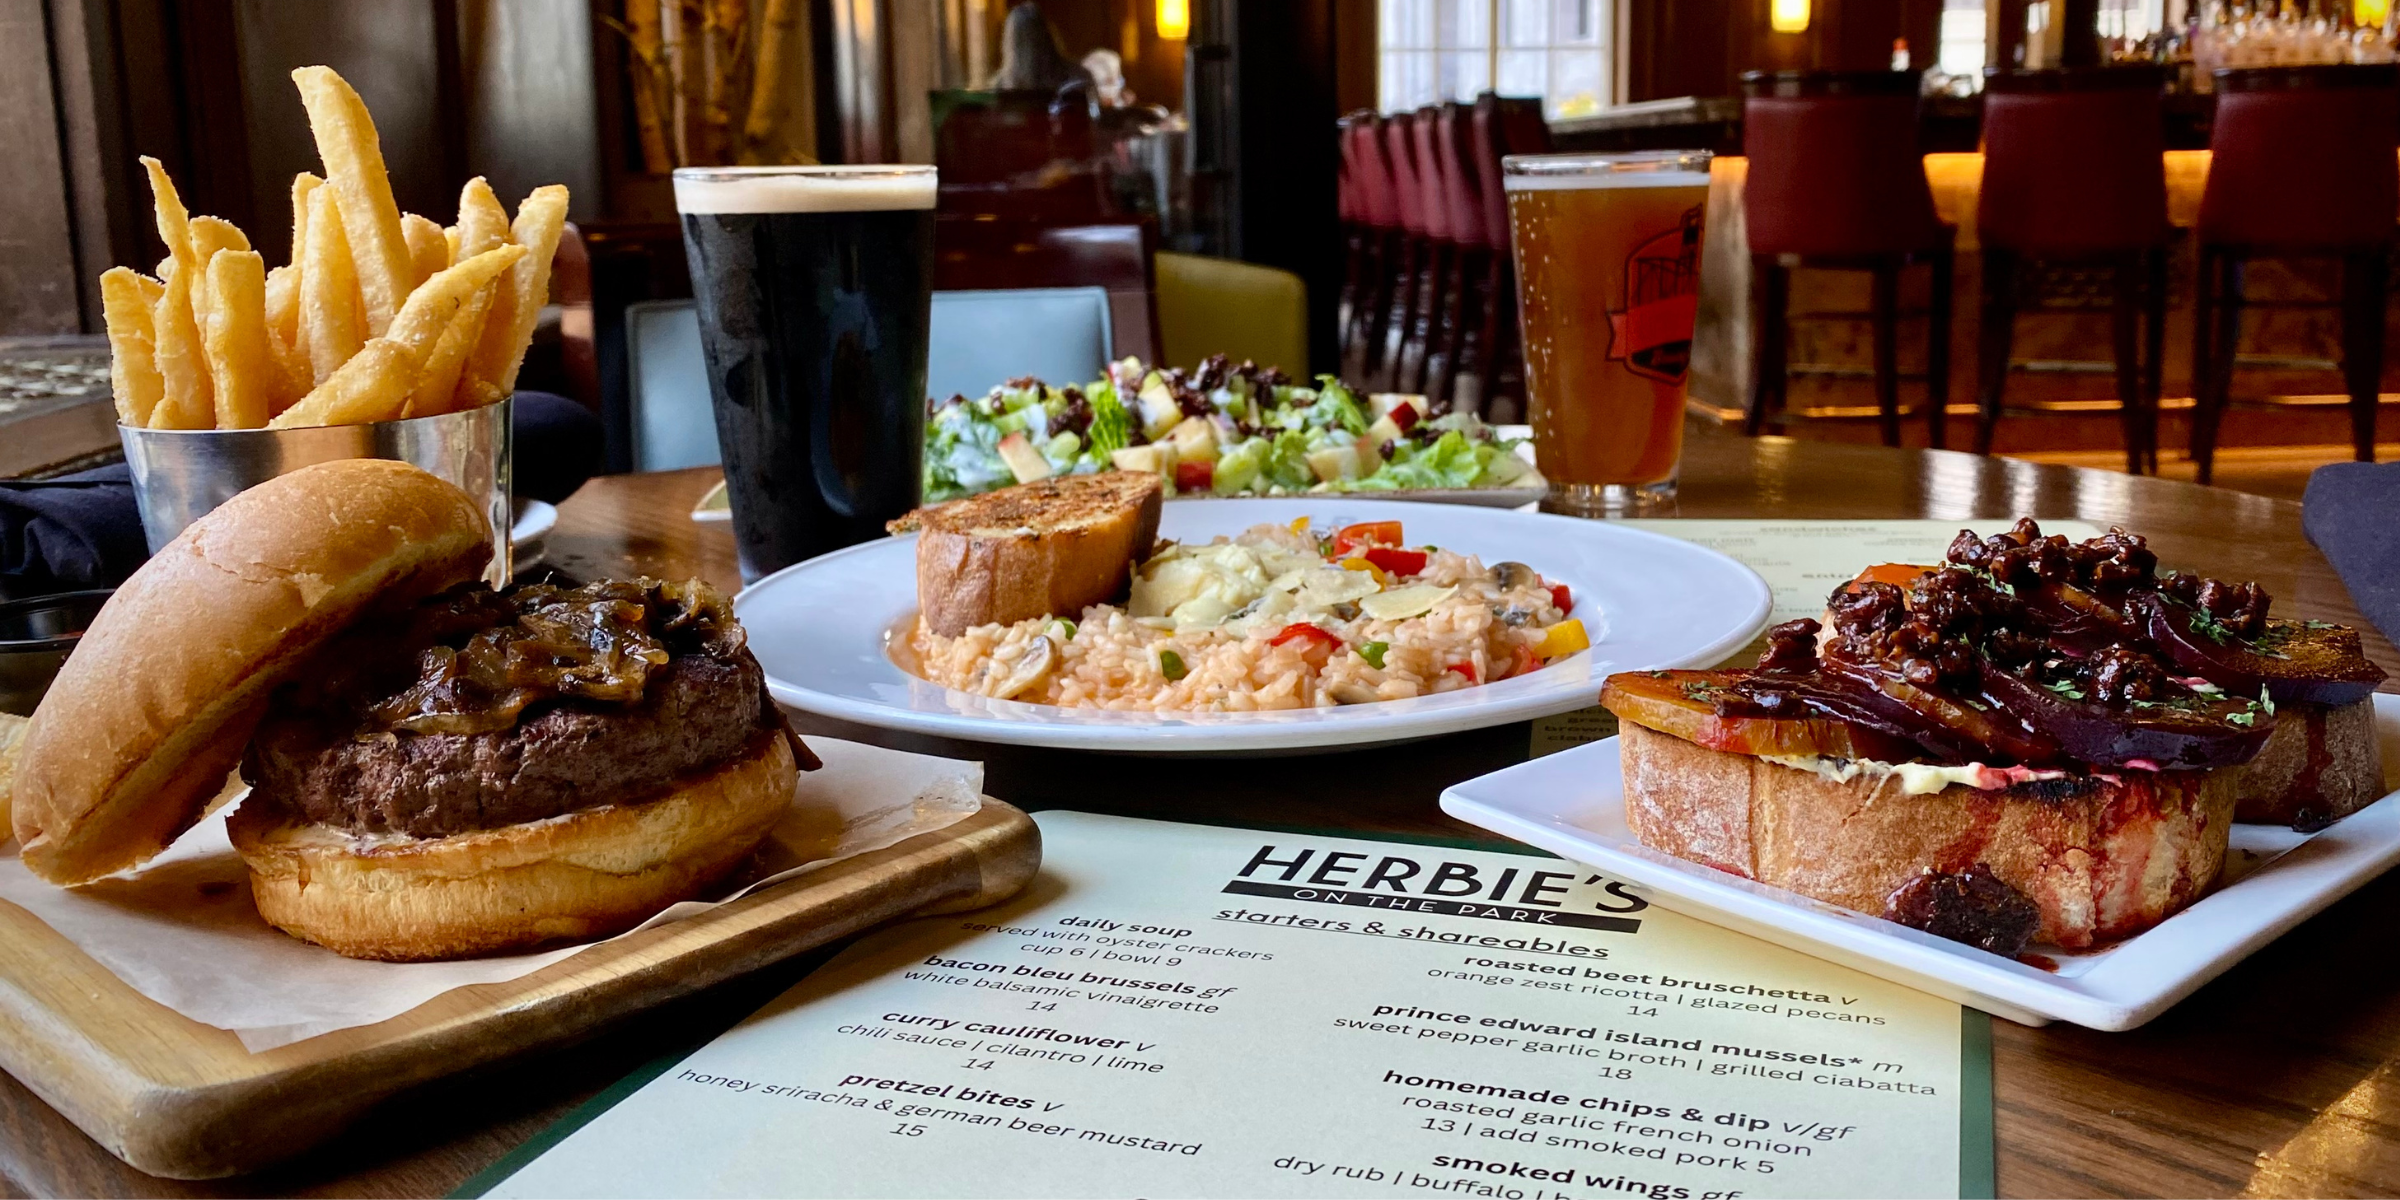 NEW! Fall Menu 2023 with delicious seasonal dishes like risotto, french onion burger, beet bruschetta, pretzel bites, and much more